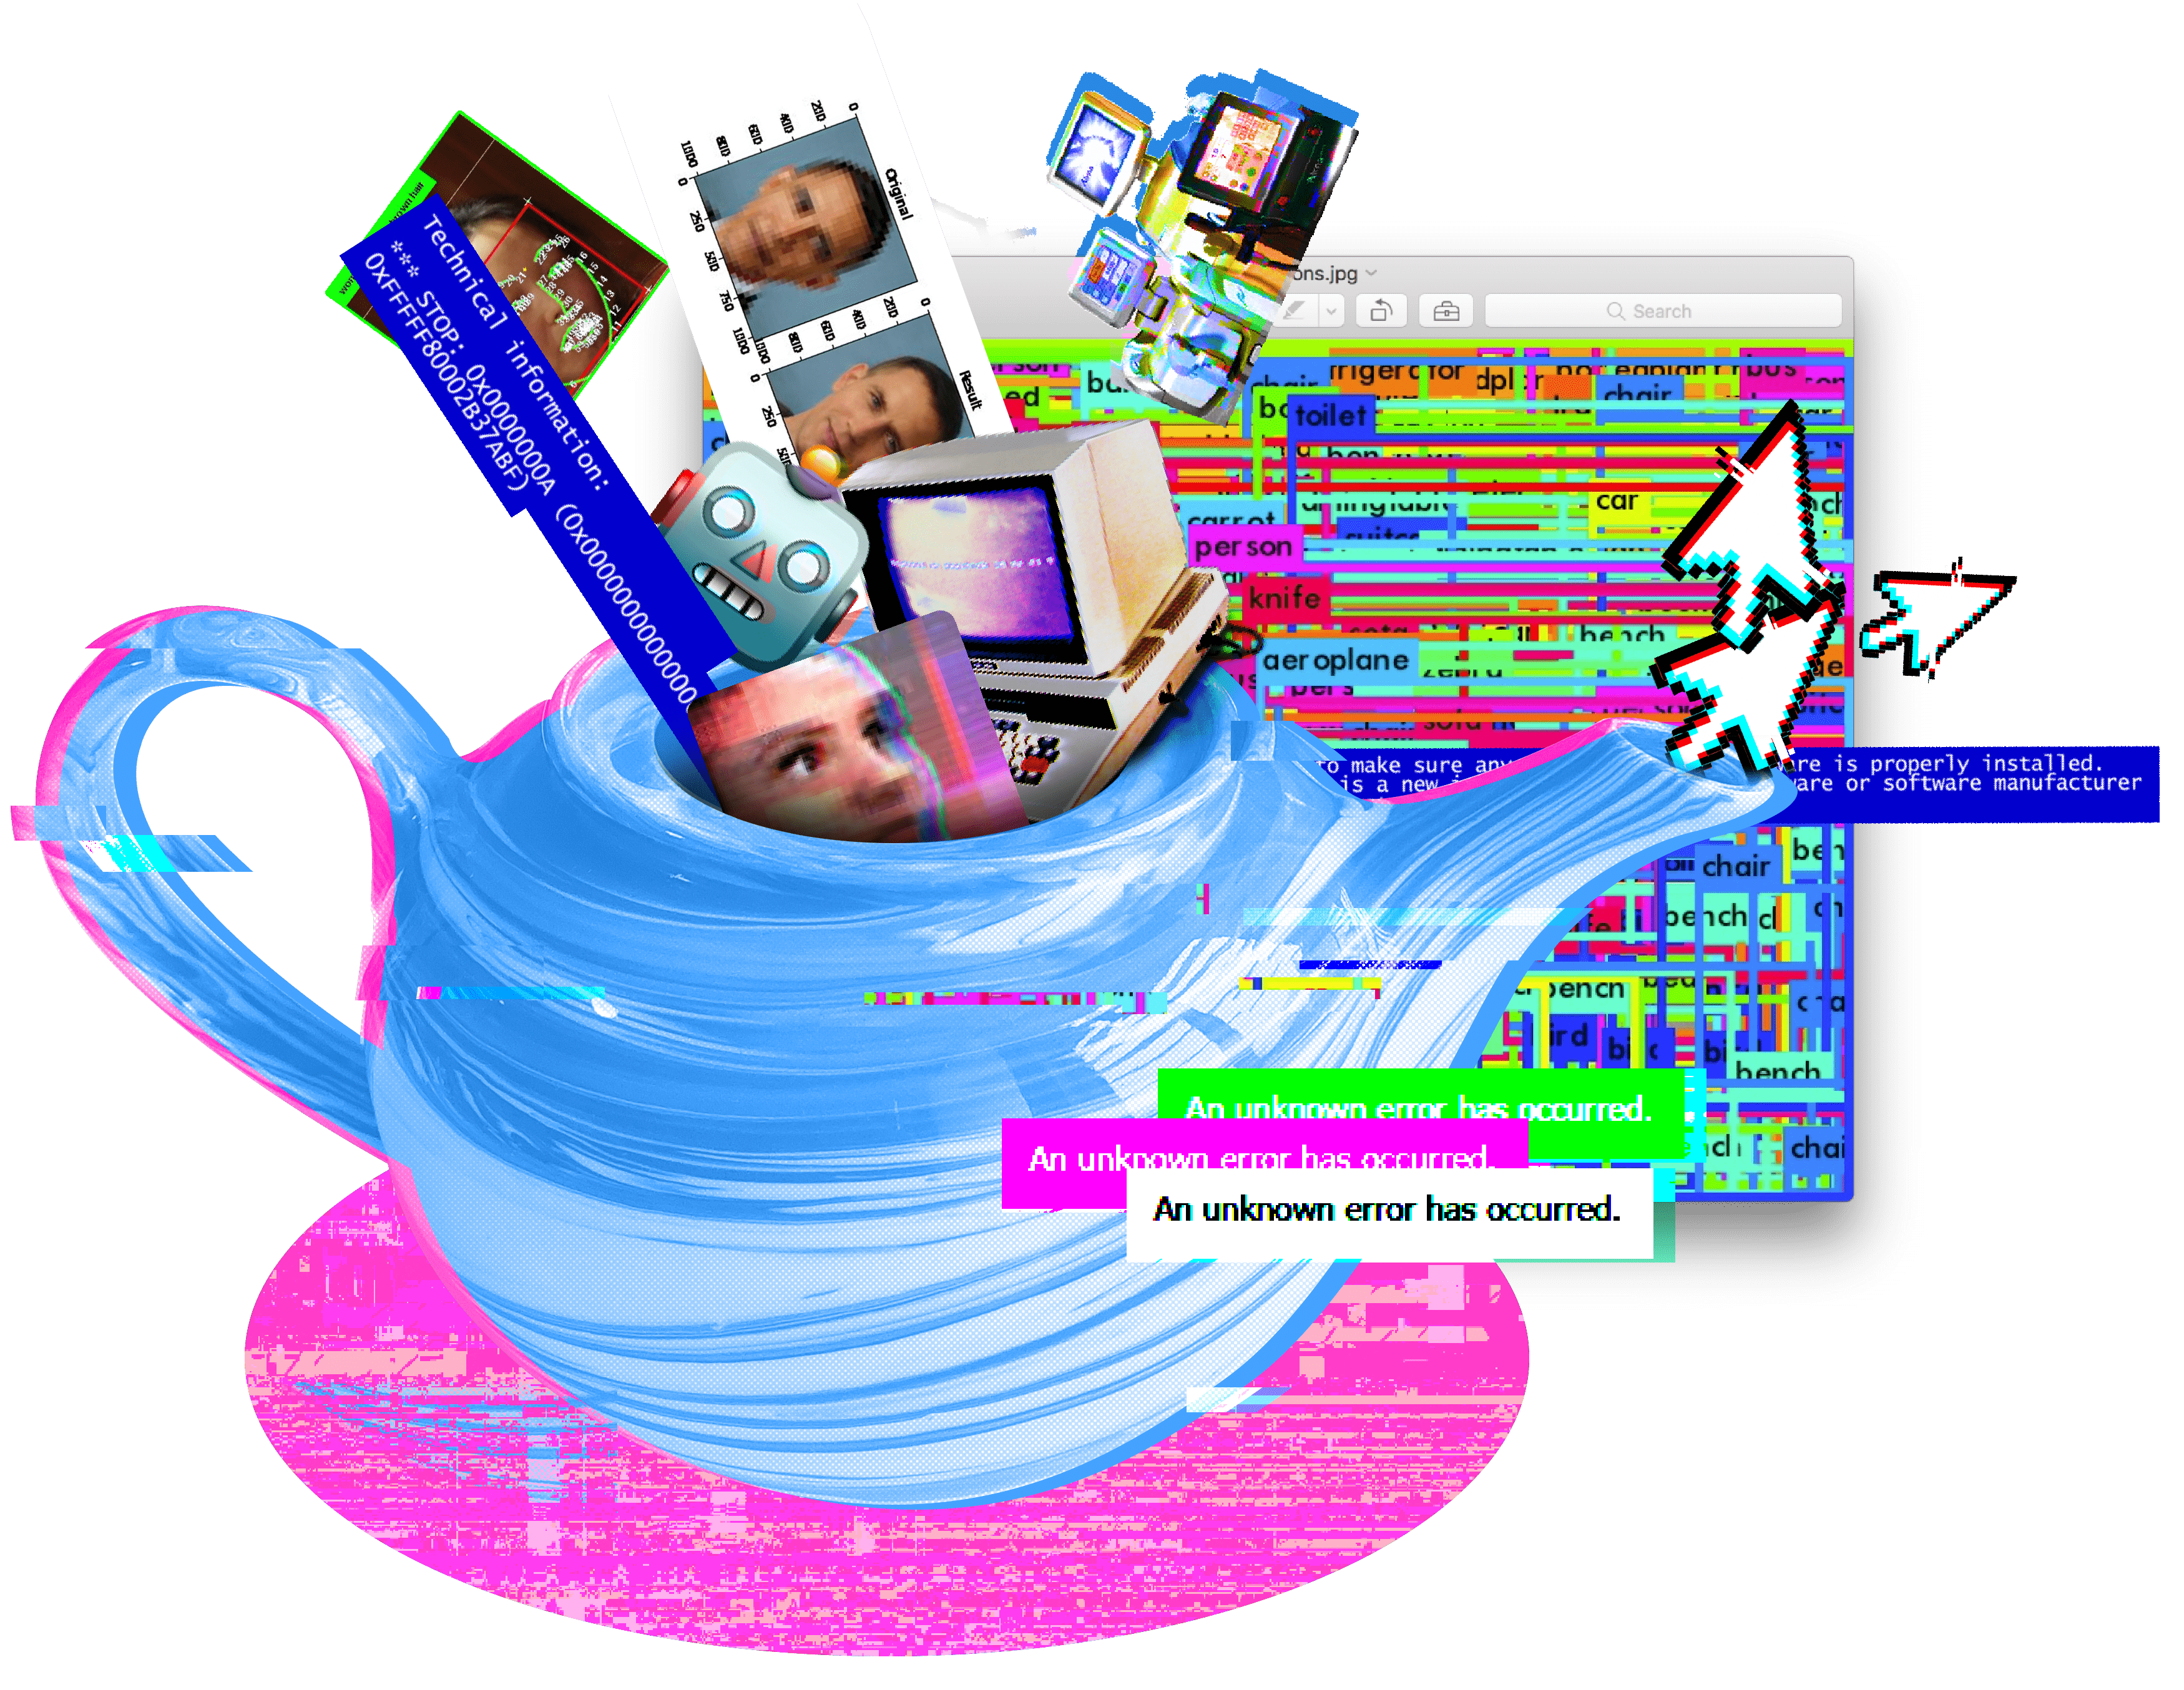 The colorful image shows a digitally drawn light blue teapot with glitches, on a pink background. It too is glitched and reminiscent of code text. Across the teapot, "An unknown error has occurred." is written several times. Various images are dropping into the teapot: including an image of Microsoft's chatbot Tay, a 3D image of a computer, the robot emoticon, and an image of a facial recognition system. Digital pixelated mouse arrows come out of the neck of the teapot. In the background is a computer window showing, superimposed a hundred times, the typical outlines of algorithmic recognition systems, each with a text label indicating what the system has recognized.